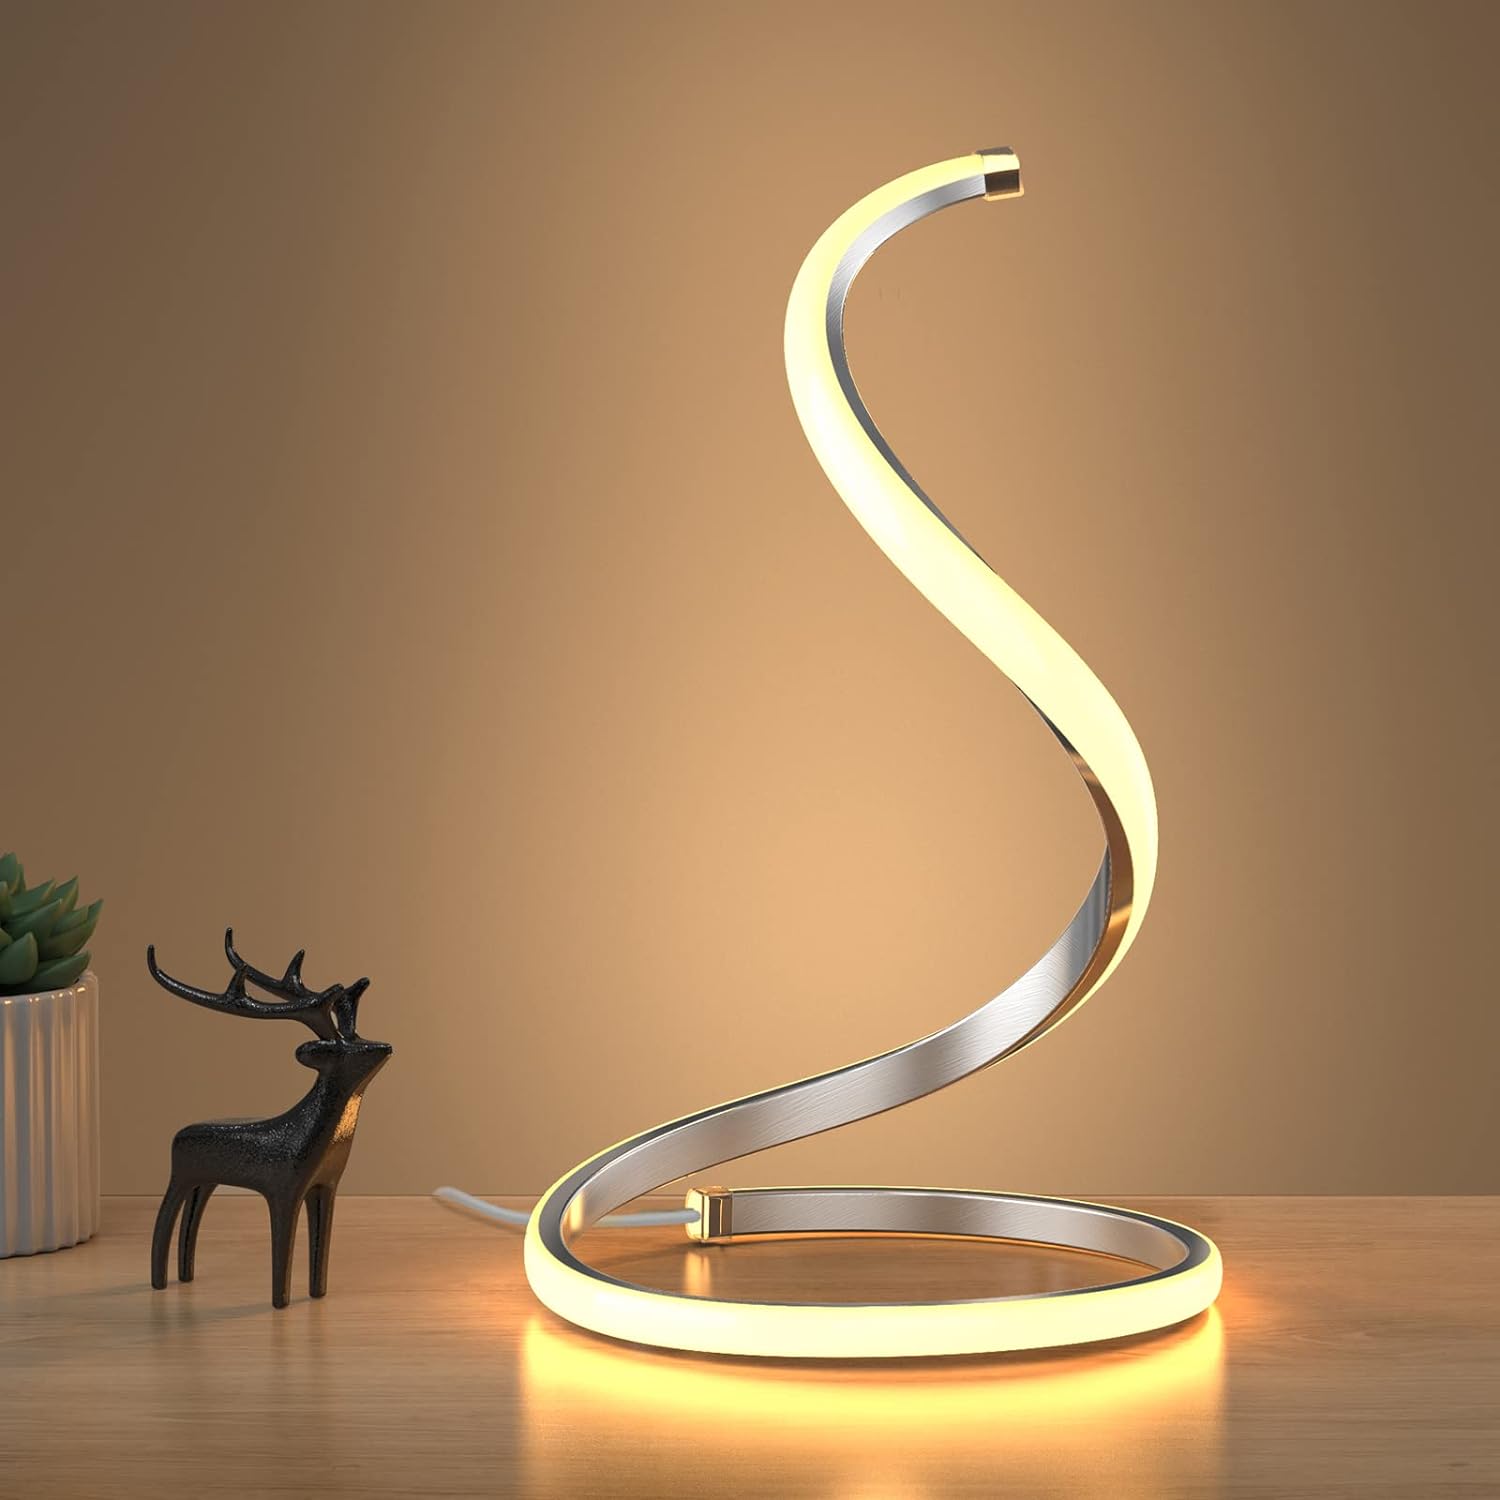 NUR Spiral Modern Bedside Lamp (Silver), Stepless Dimmable, 3 Color Temperature, Curved Art Decorative Nightstand/Table Lamp for Bedroom Living Room Office Home